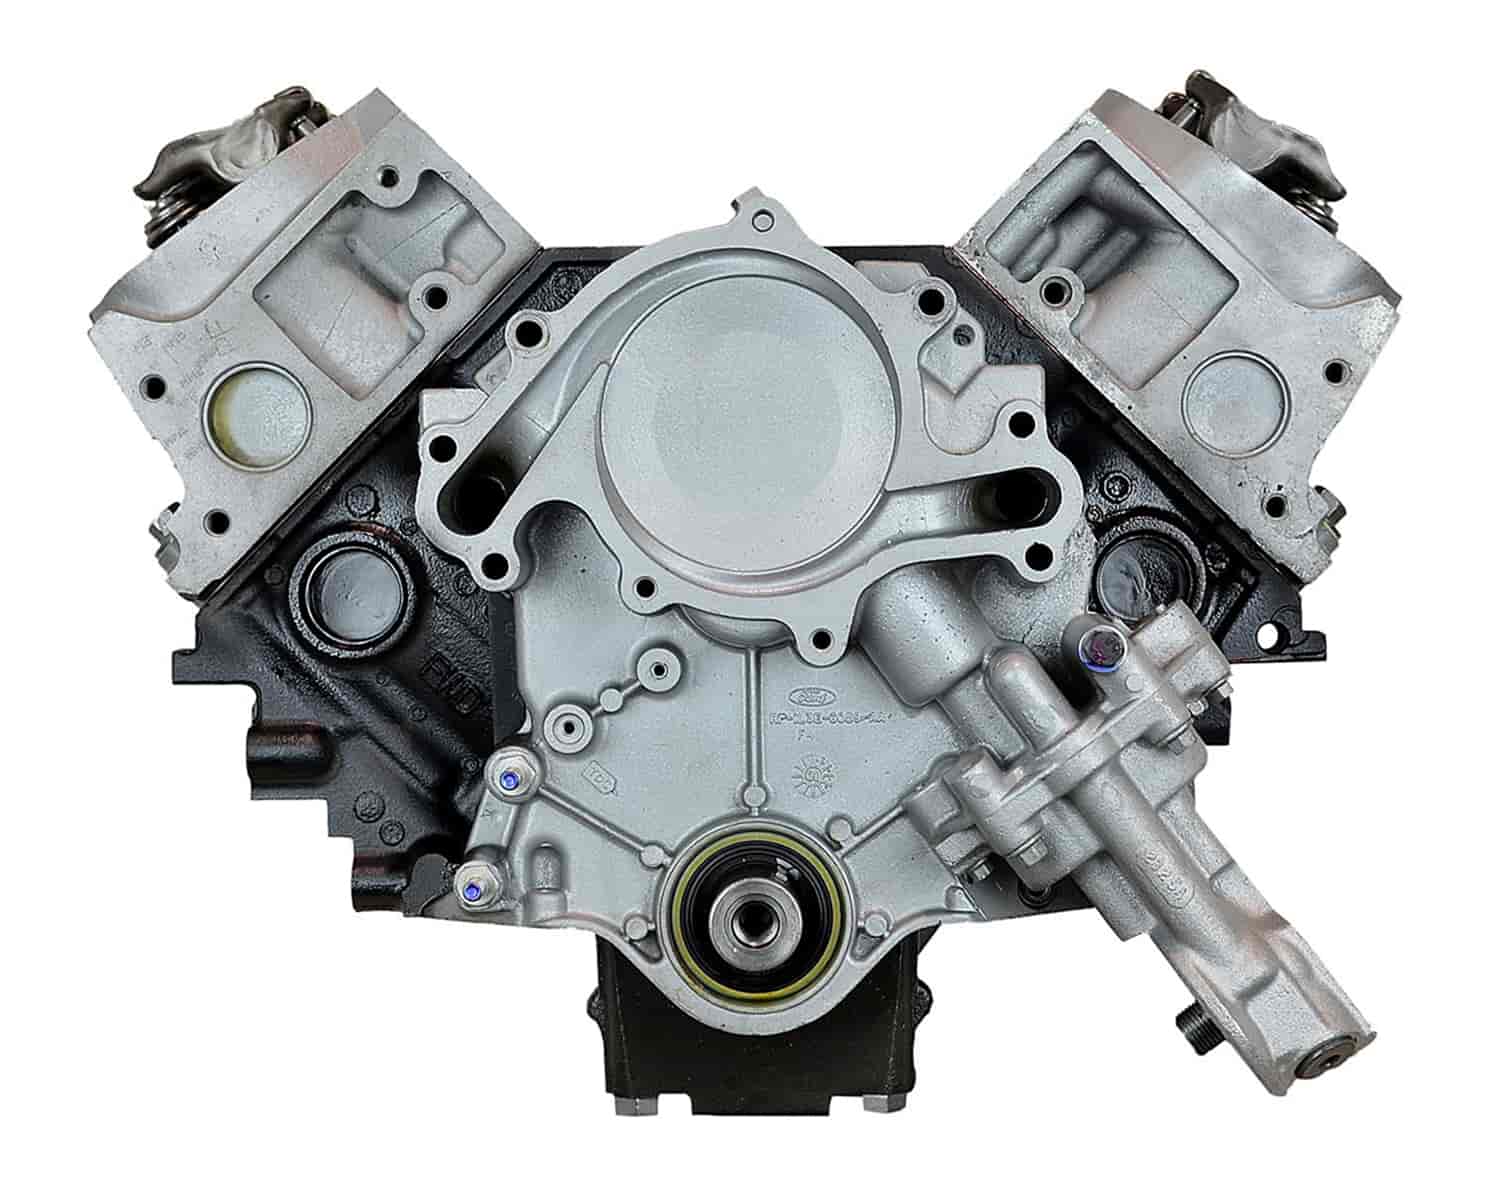 Remanufactured Crate Engine for 1997-1998 Ford Windstar with